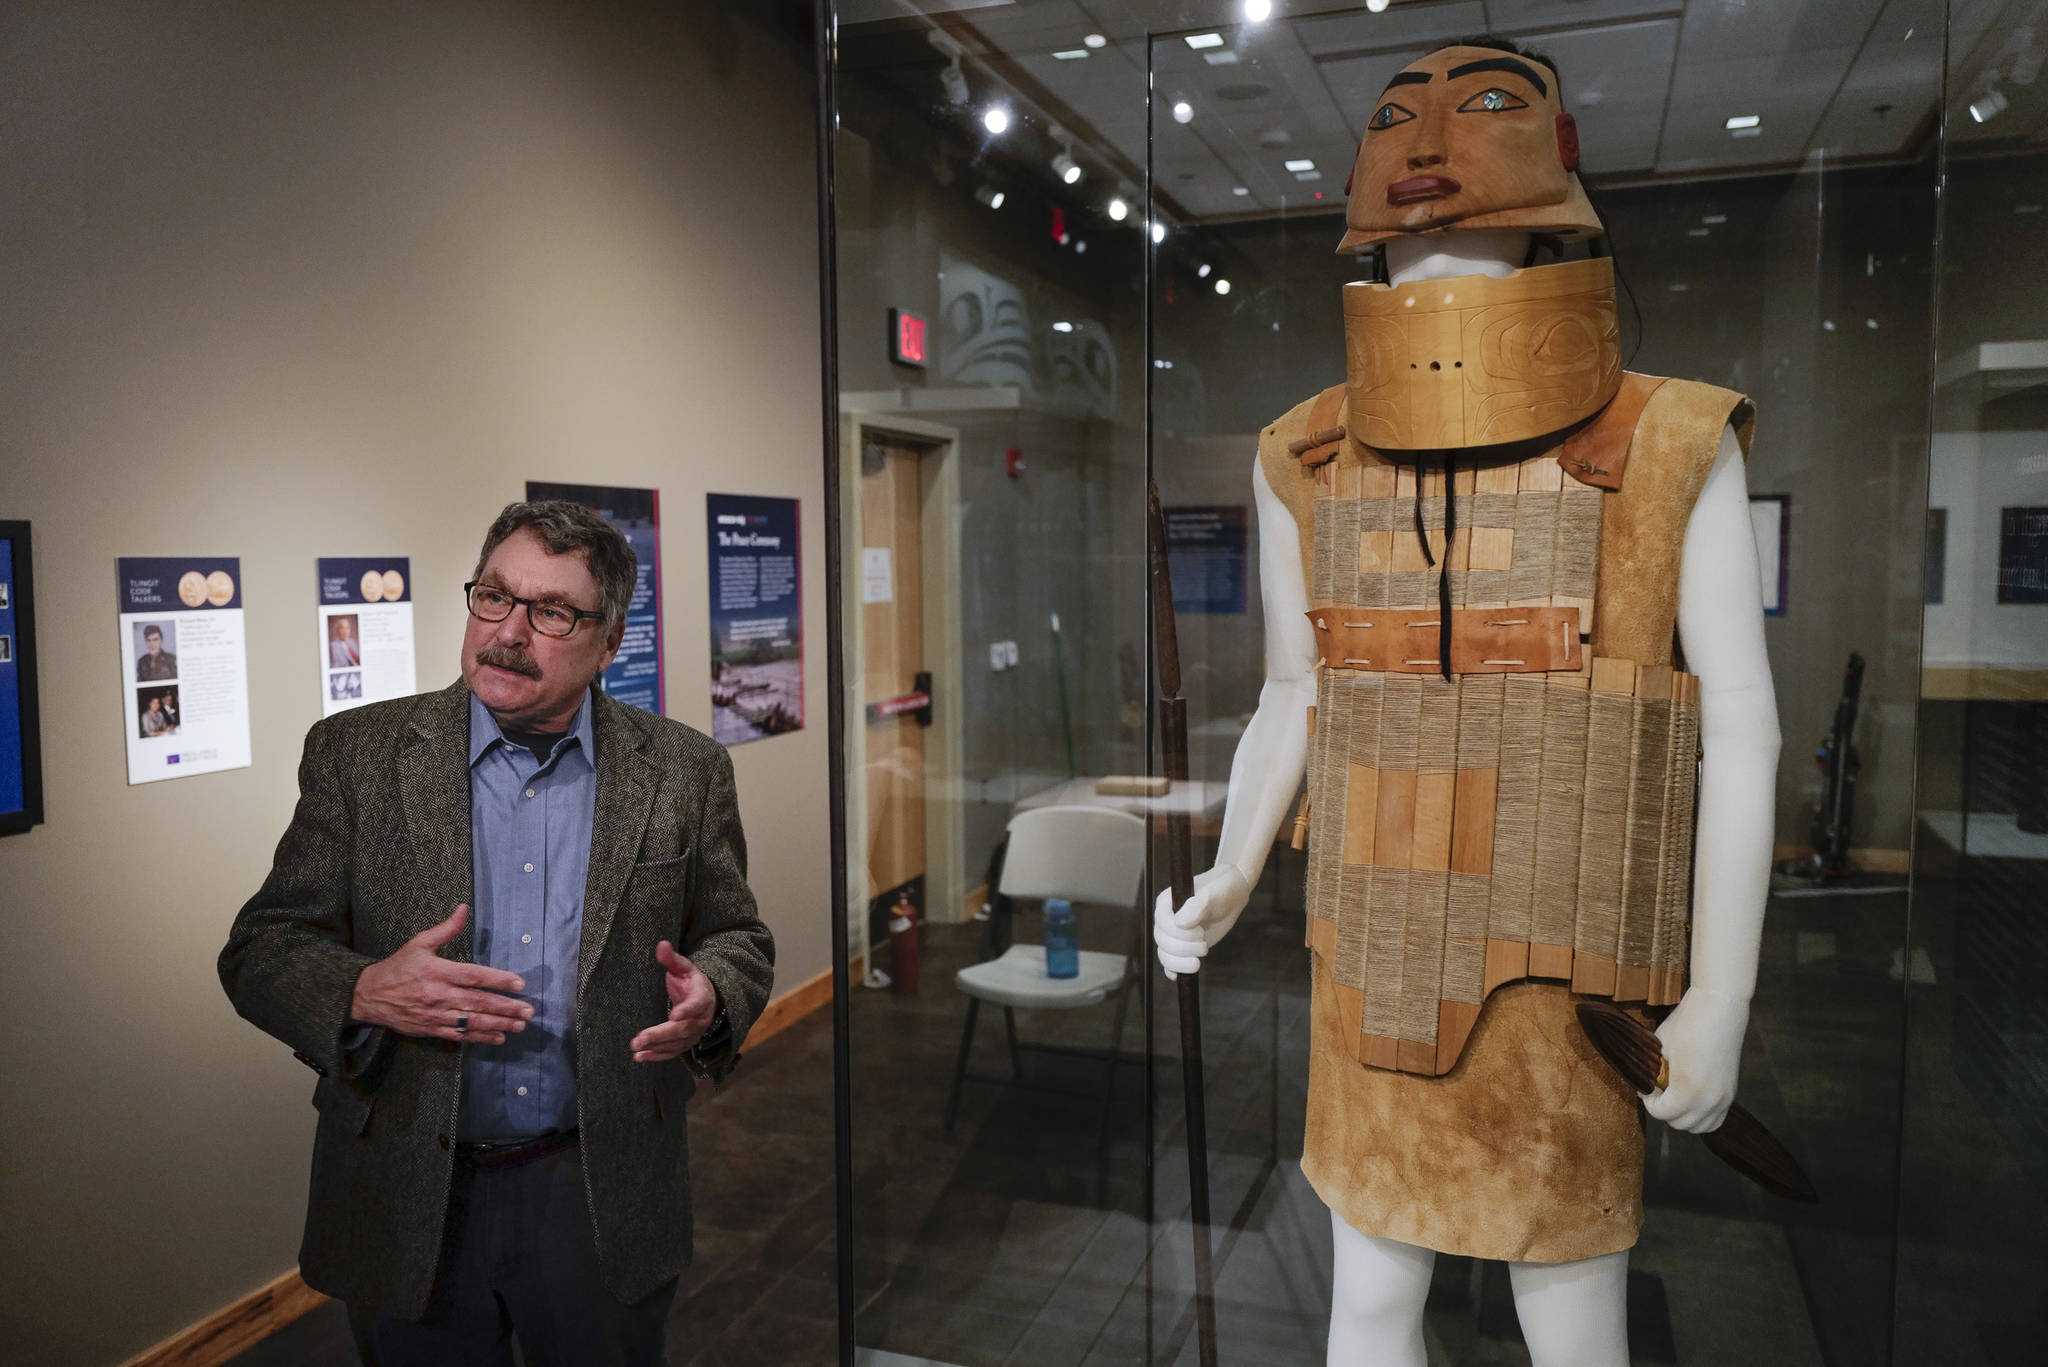 Chuck Smythe, Ph.D., History and Culture Director for Sealaska Heritage Institute, standing next to reproduction of Tlingit battle armor by Sitka artist Tommy Joseph, gives a tour of new temporary exhibit, “War & Peace” in the institute’s gallery on Friday, Dec. 6, 2019. The exhibit opens Friday, Dec. 6, for Gallery Walk and will be up until February. (Michael Penn | Juneau Empire)